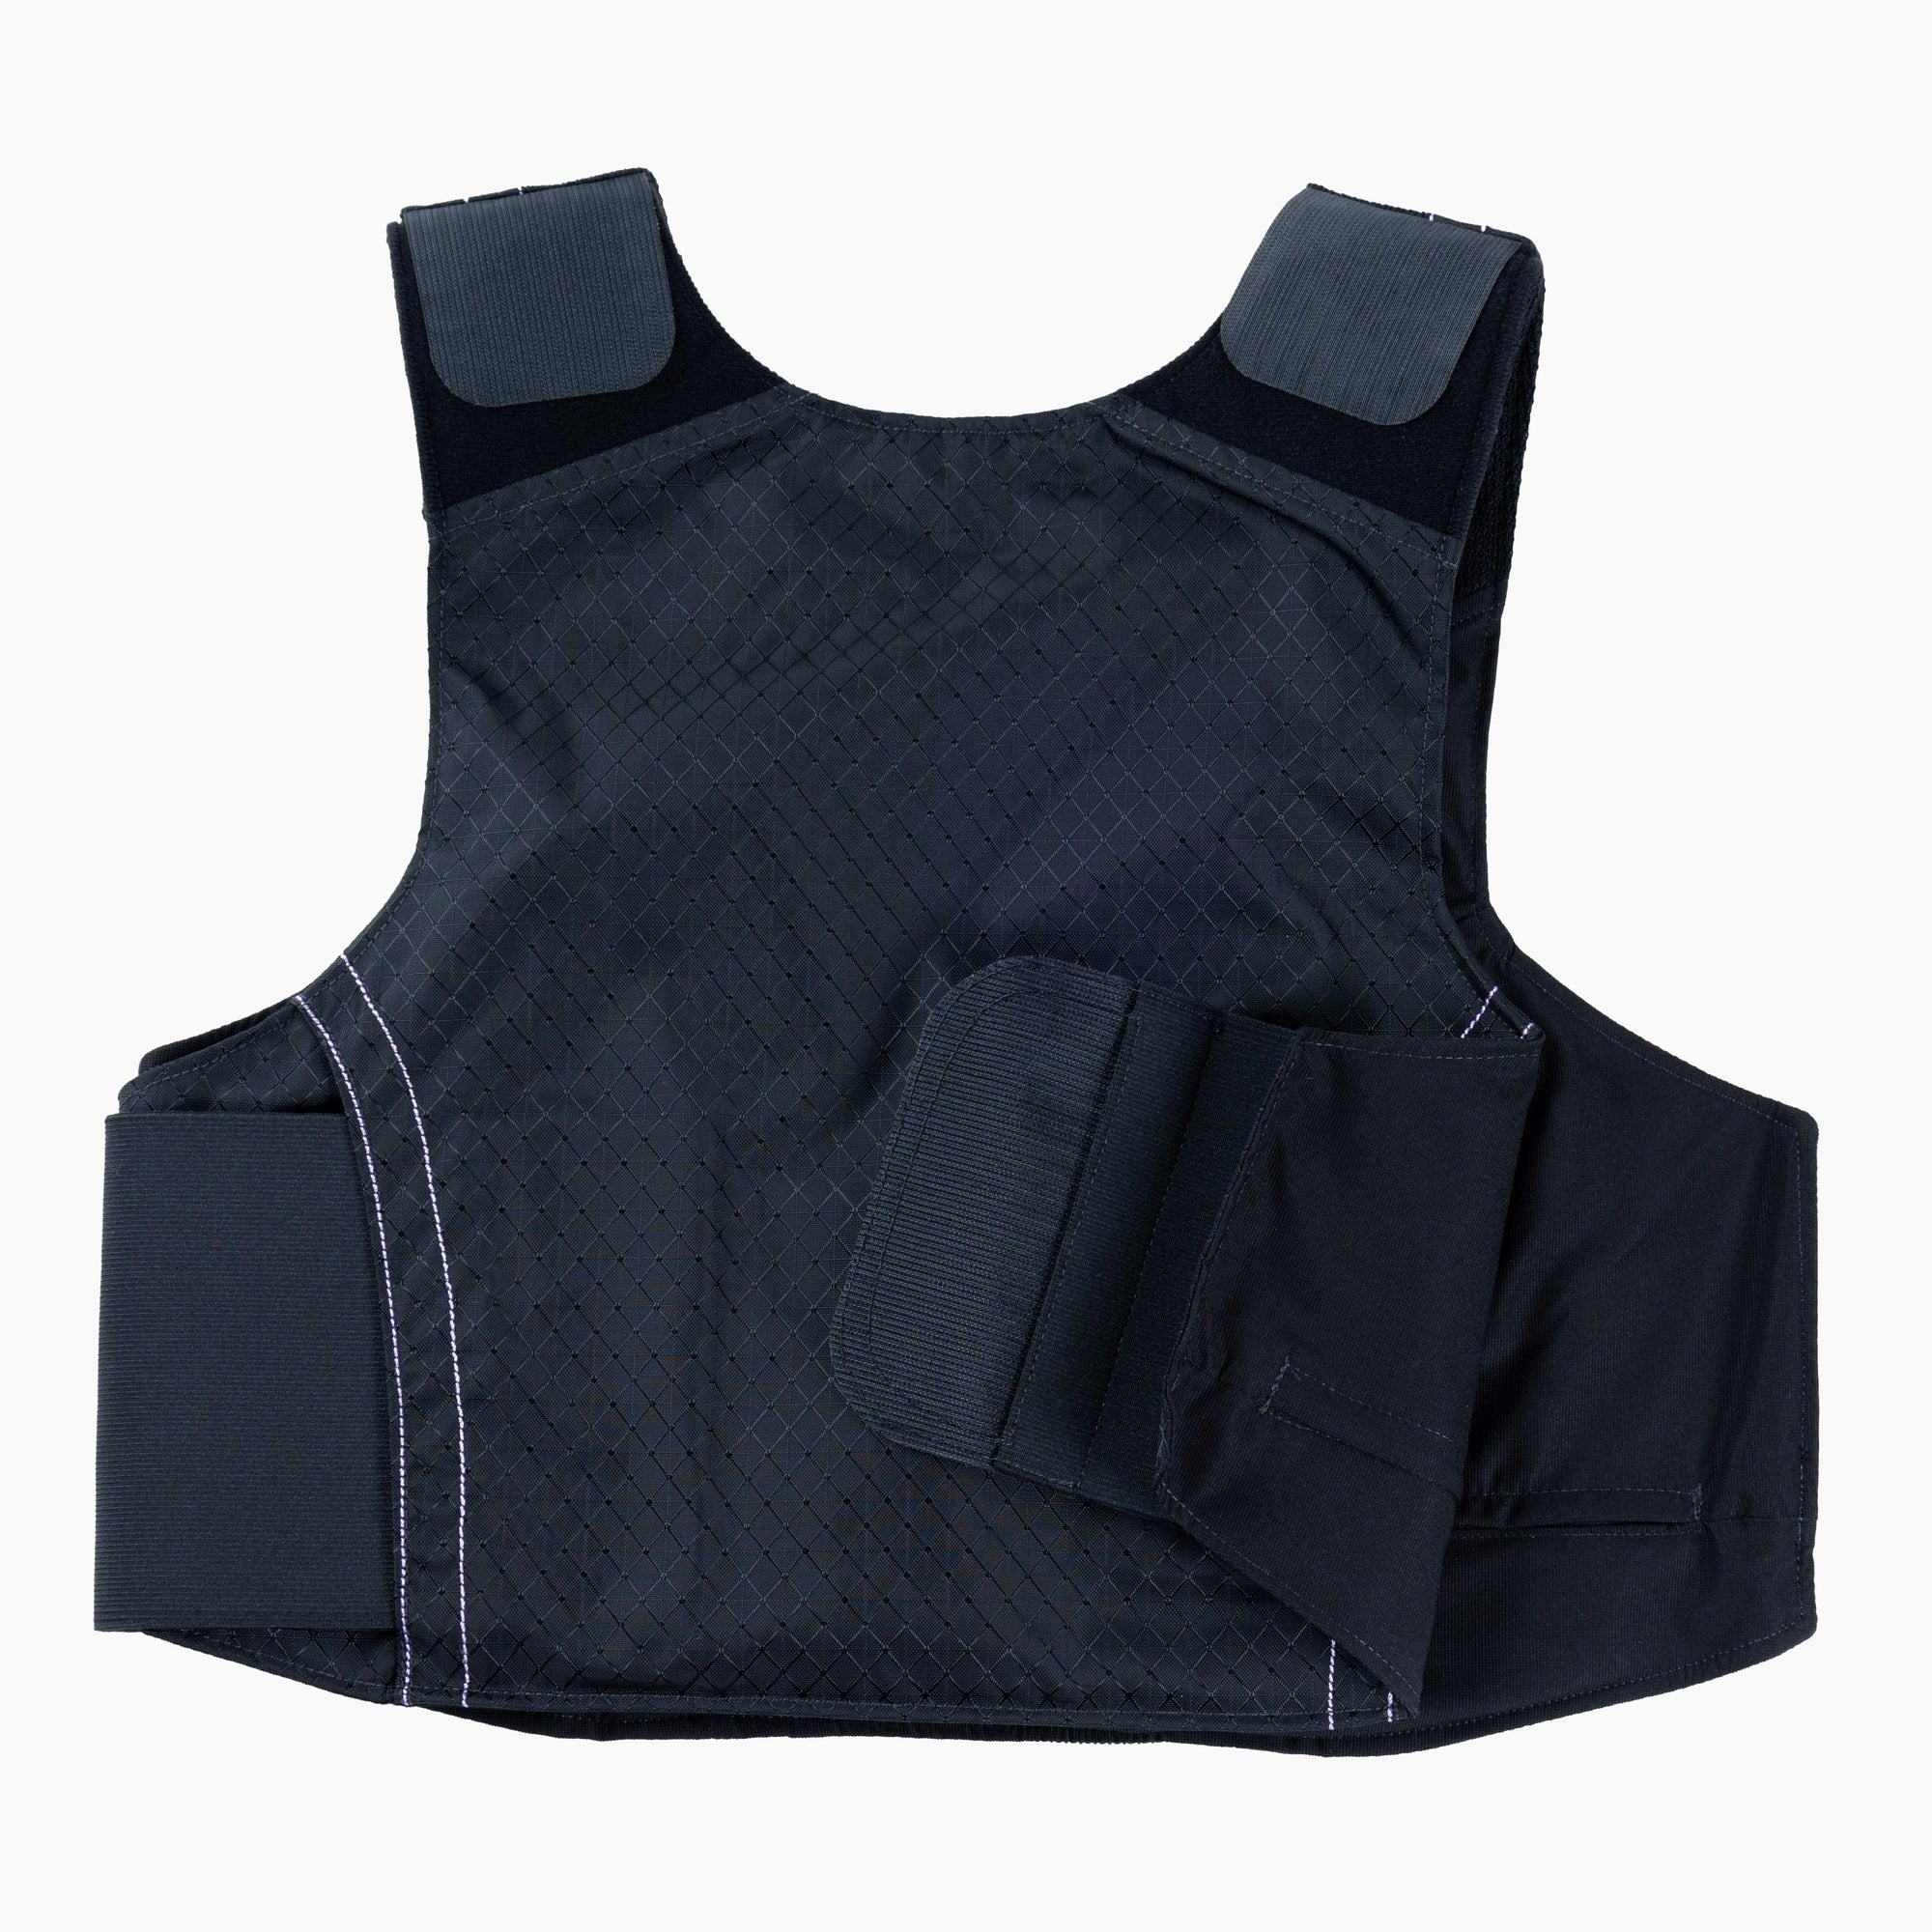 Female Concealable Armor Vest - Carrier Only